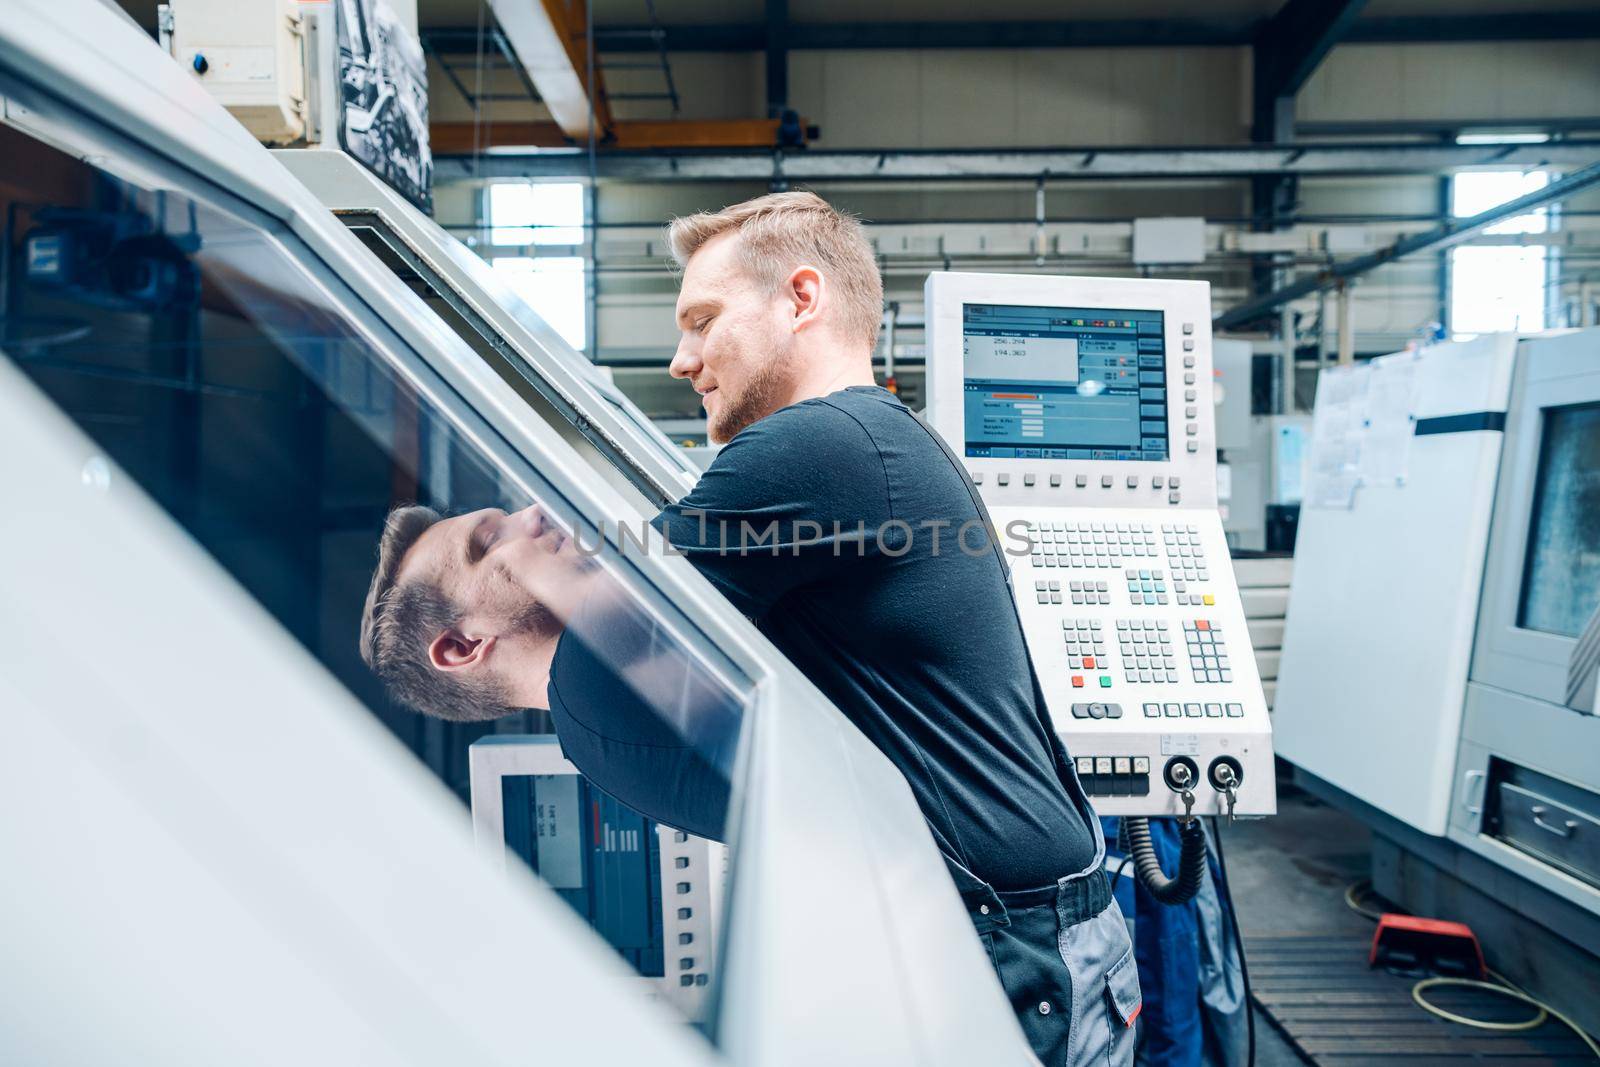 Worker resetting a cnc lathe machine in manufacturing factory by Kzenon